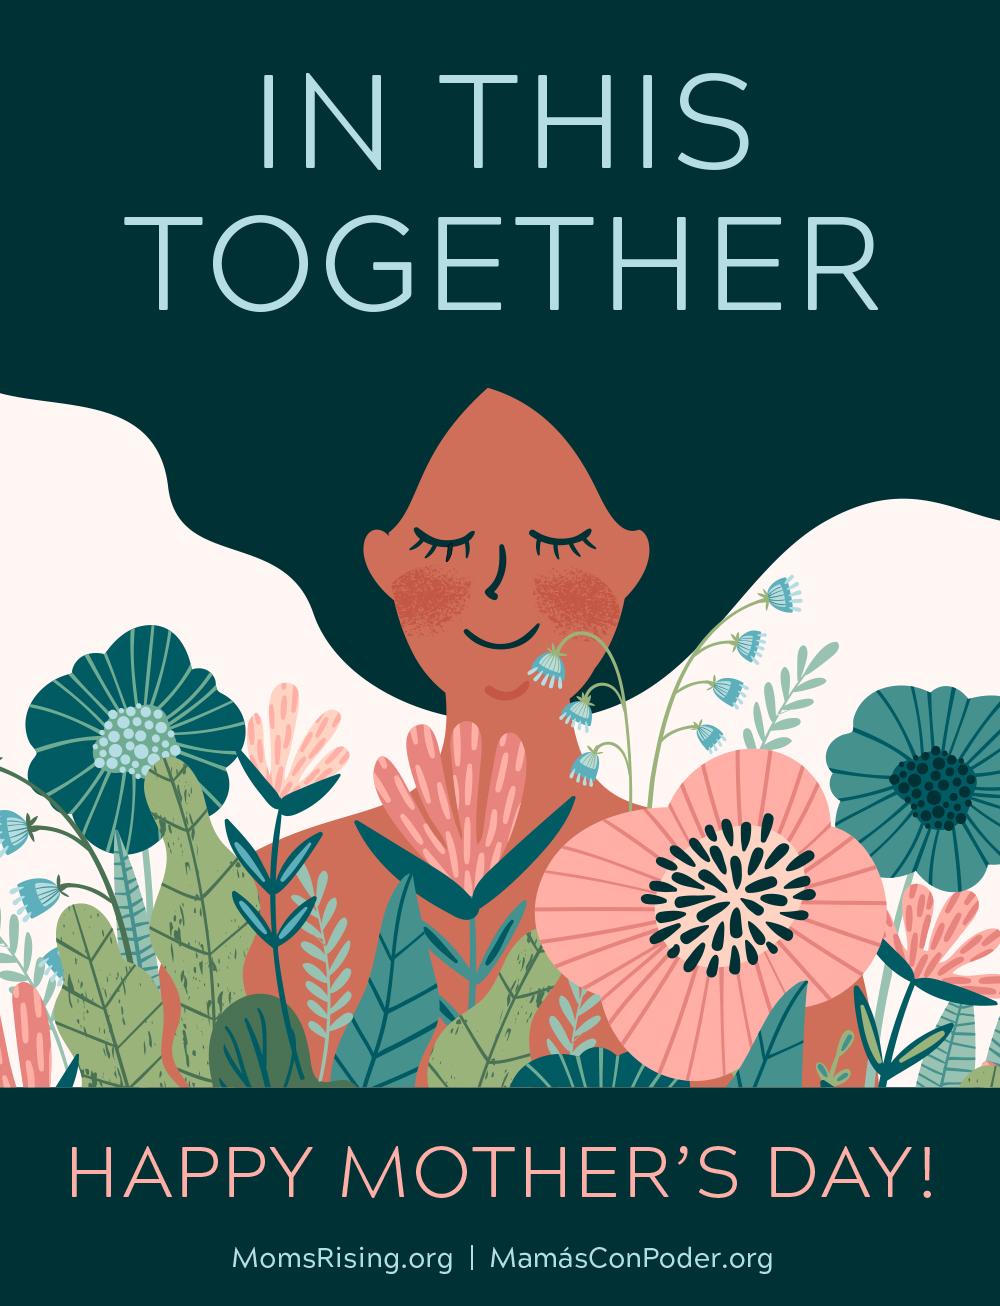 [IMAGE DESCRIPTION: A colorful graphic that says "In this together" and "Happy Mother's Day" with an image of a smiling long haired person and flowers]